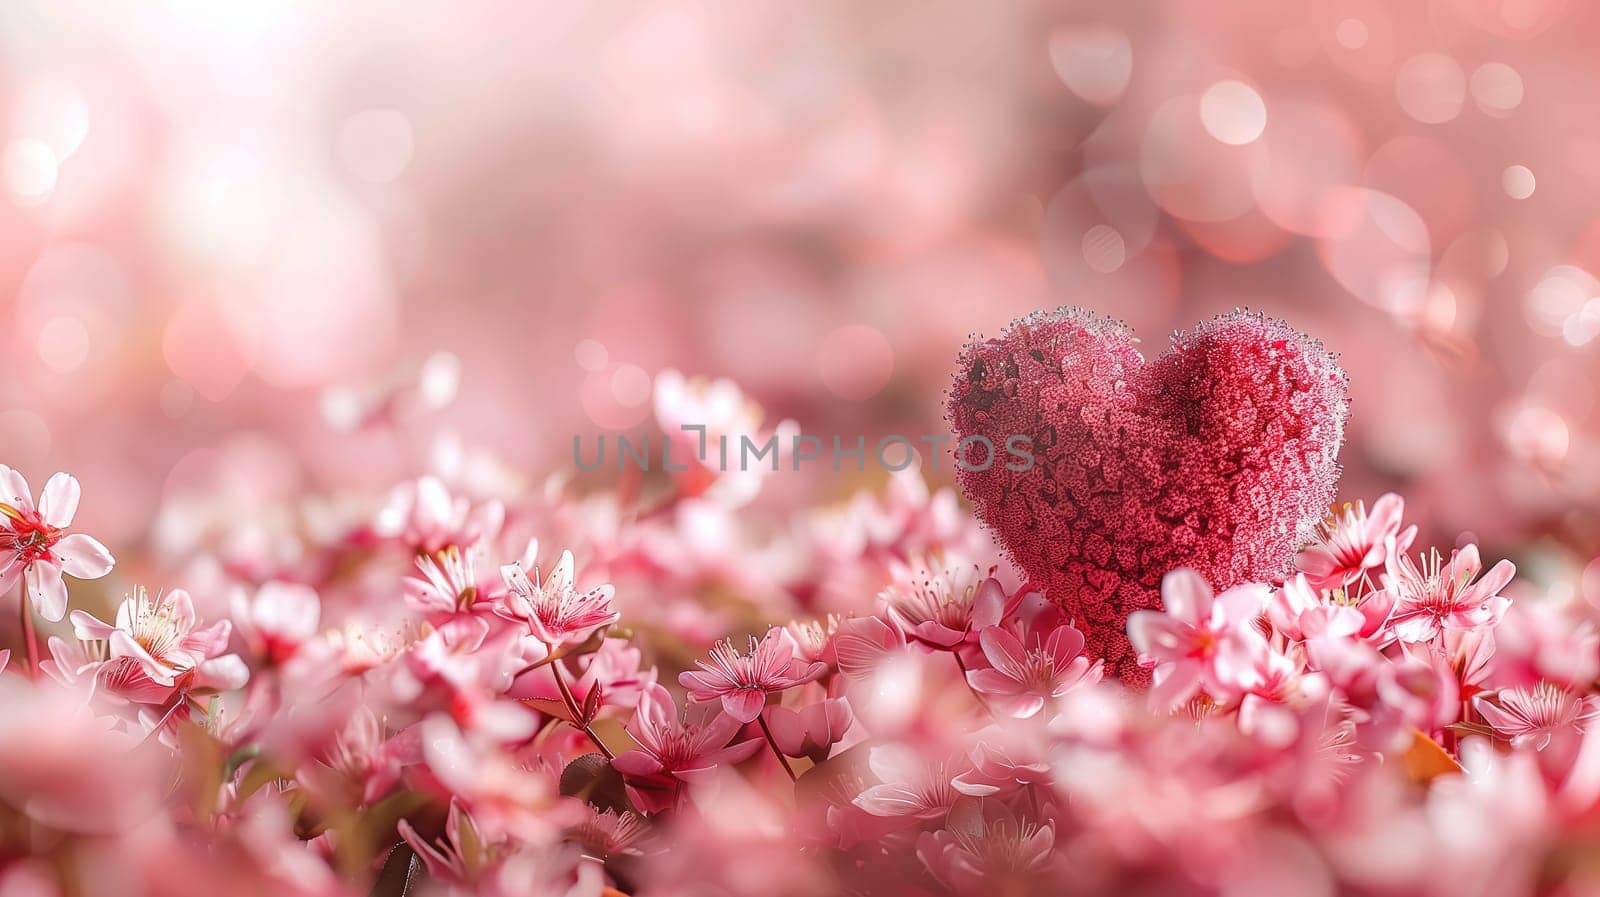 Celebrating International Mothers Day With a Heart Amidst Blossoming Flowers by TRMK